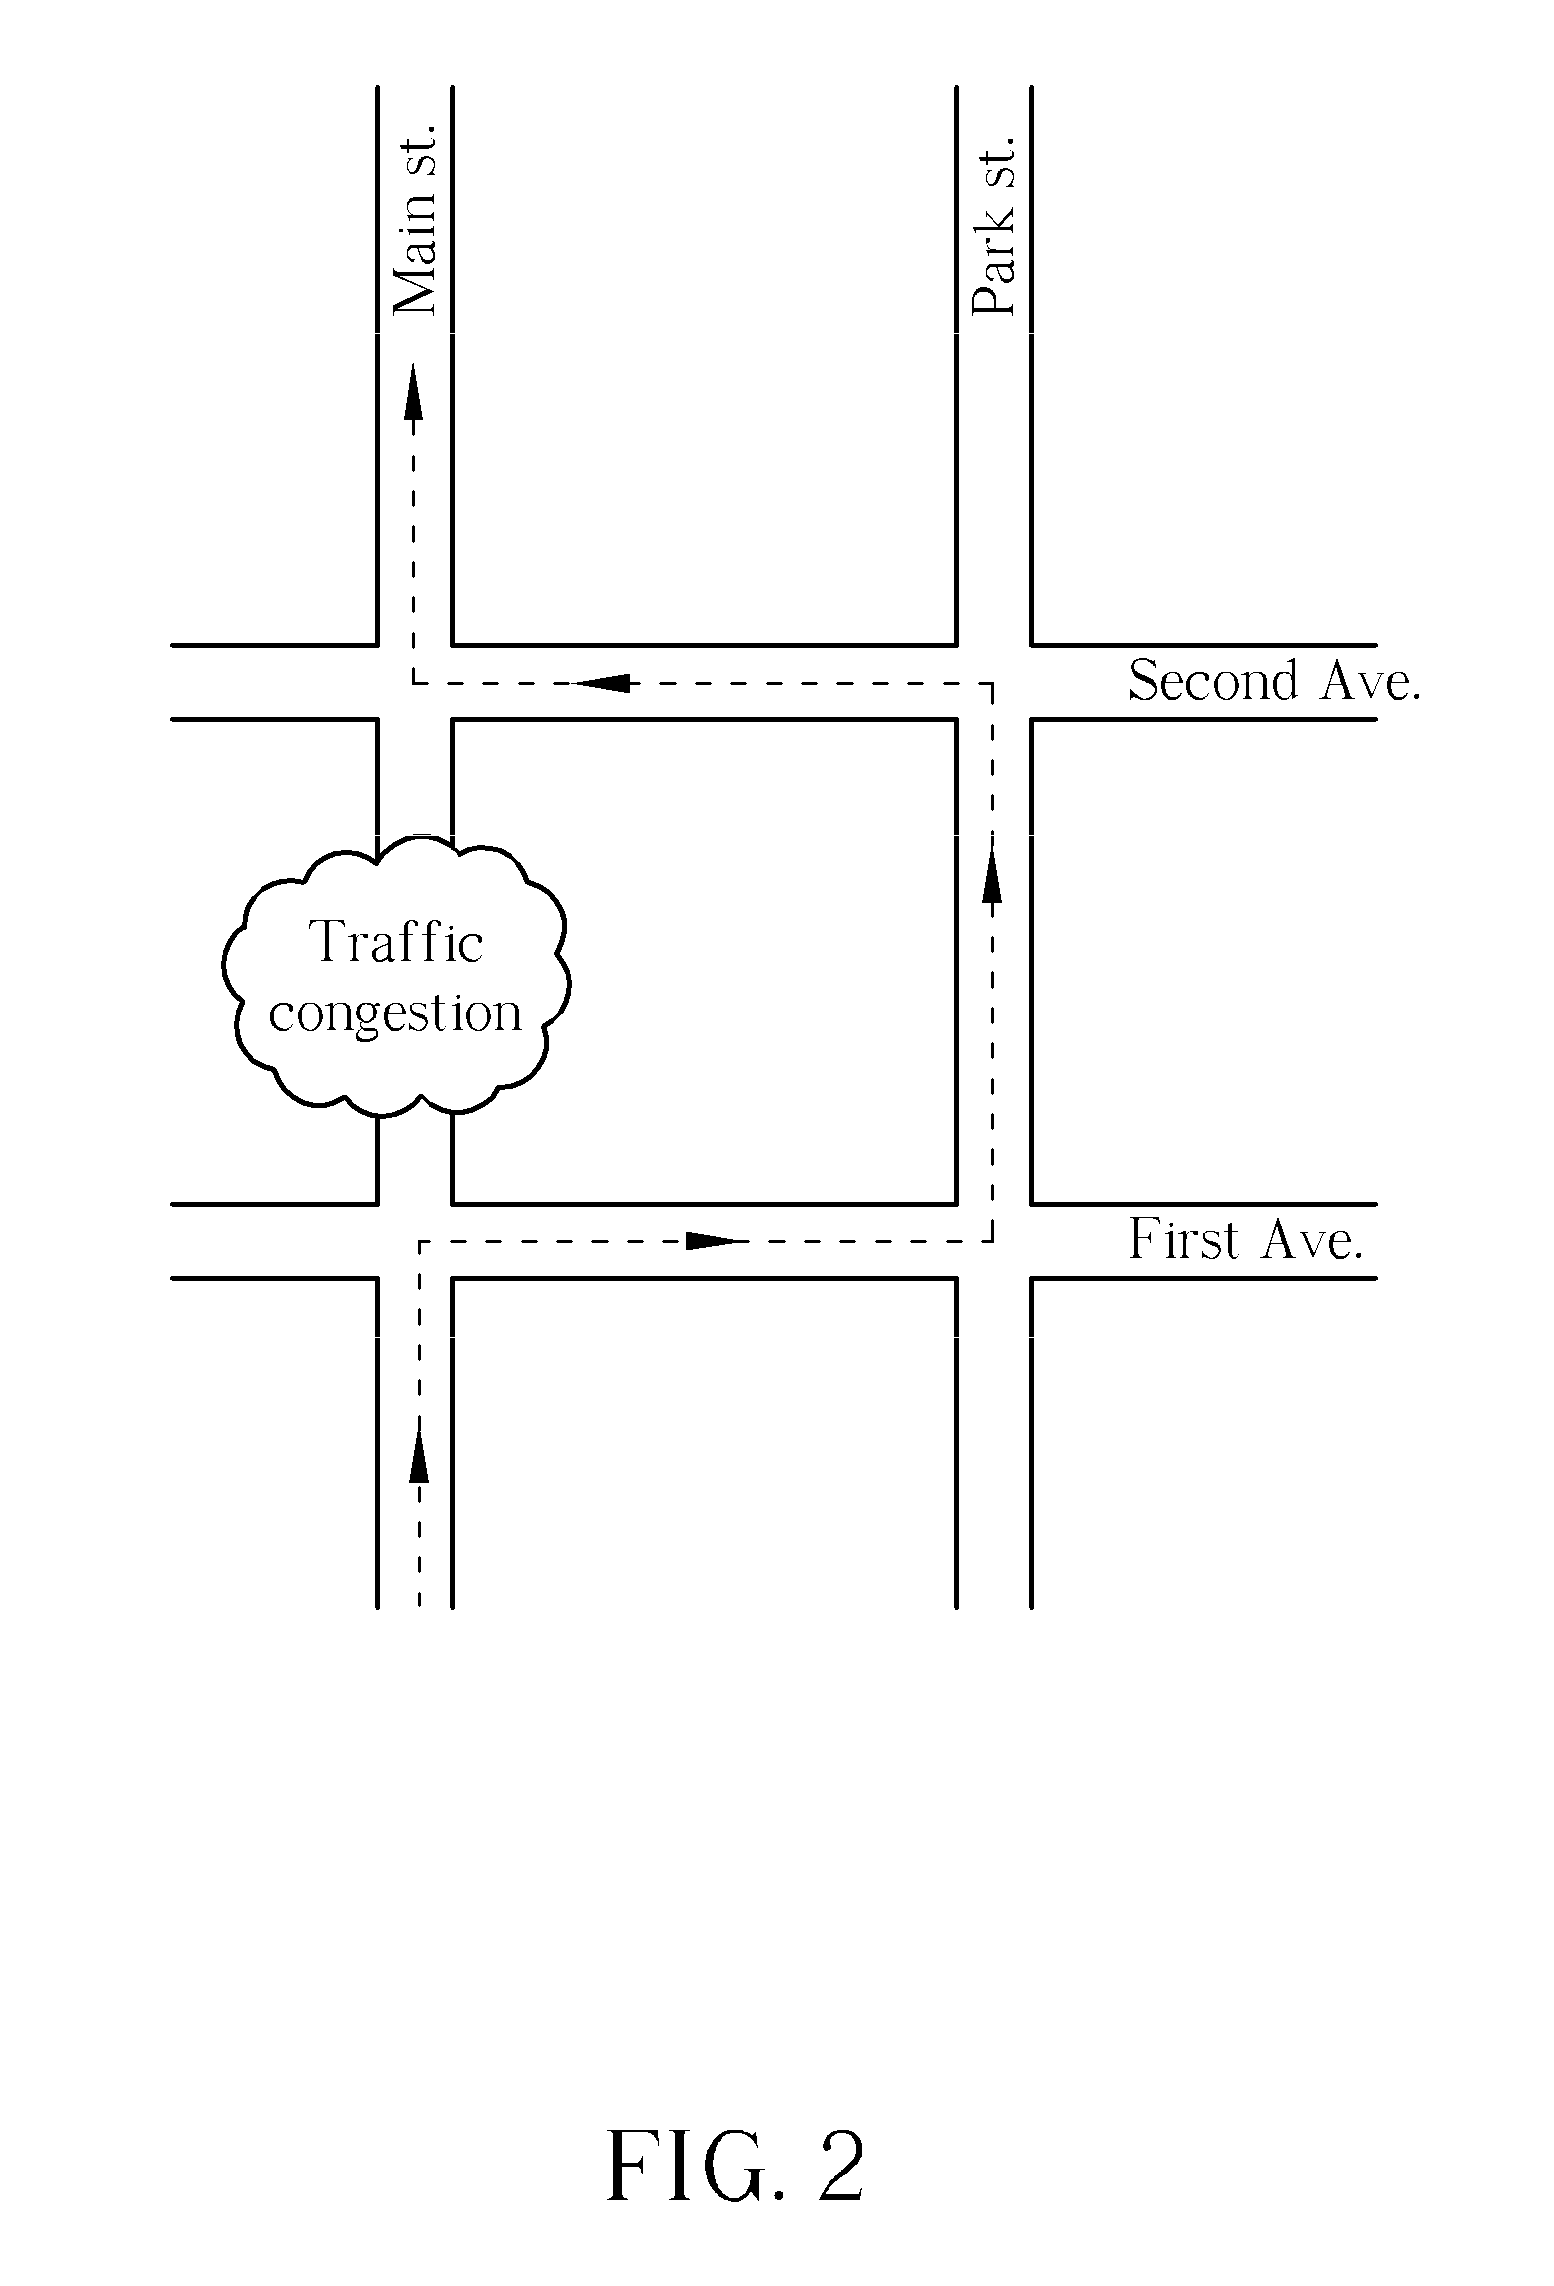 Method of utilizing a personal navigation device to suggest alternate routes being identified by recognizable street names